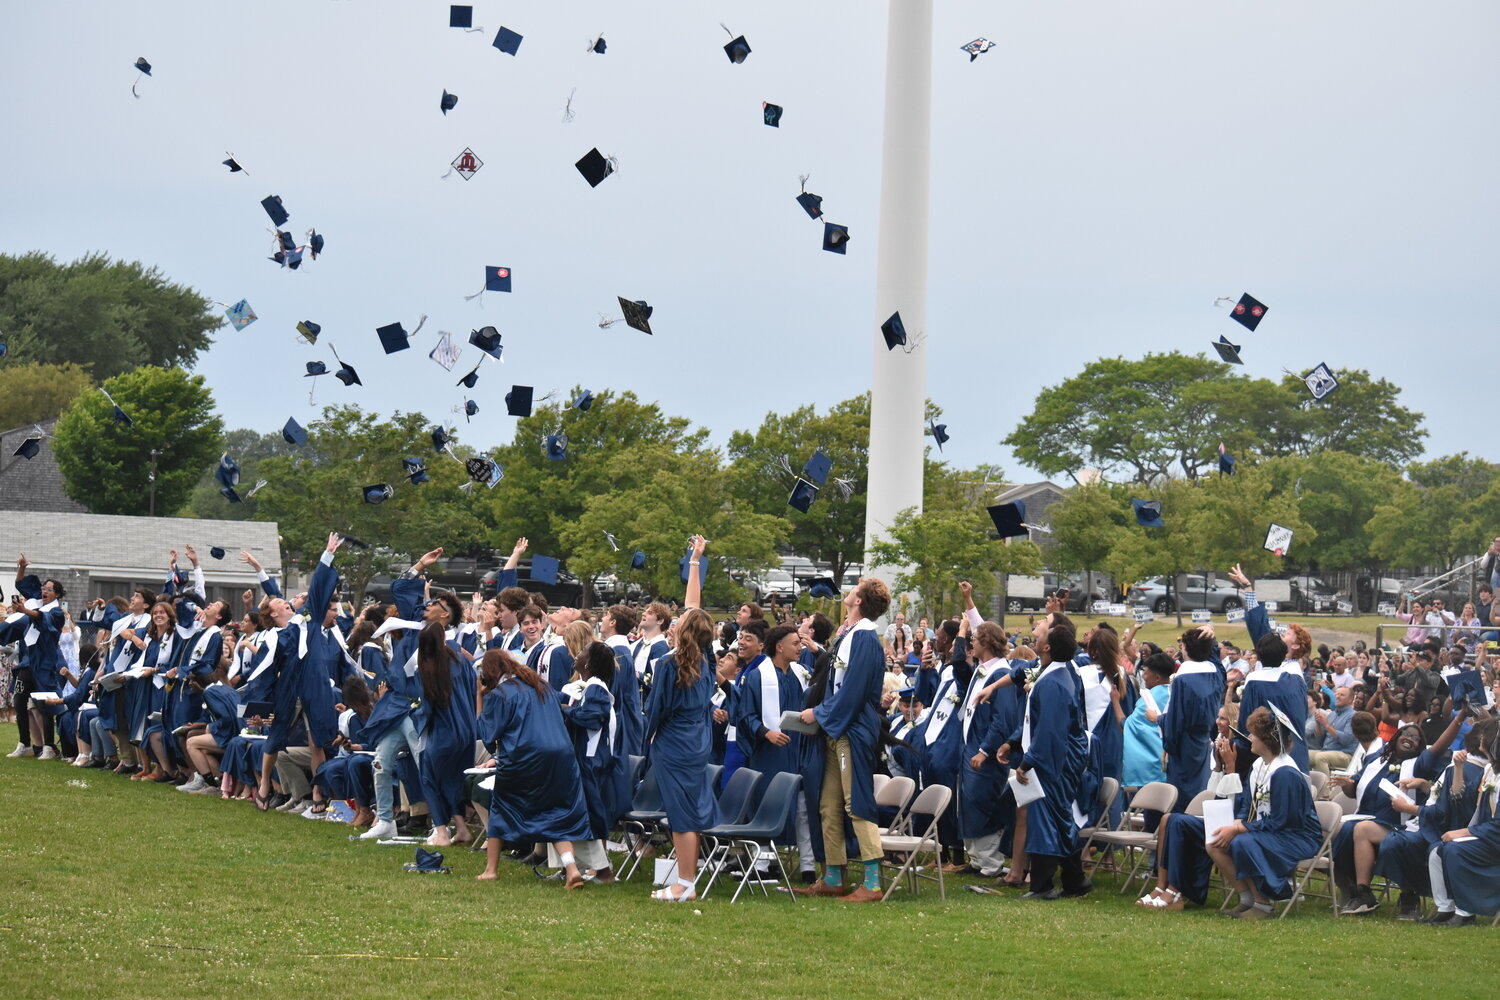 The Nantucket High School class of 2023 tosses their caps at the end of Friday's graduation ceremony.